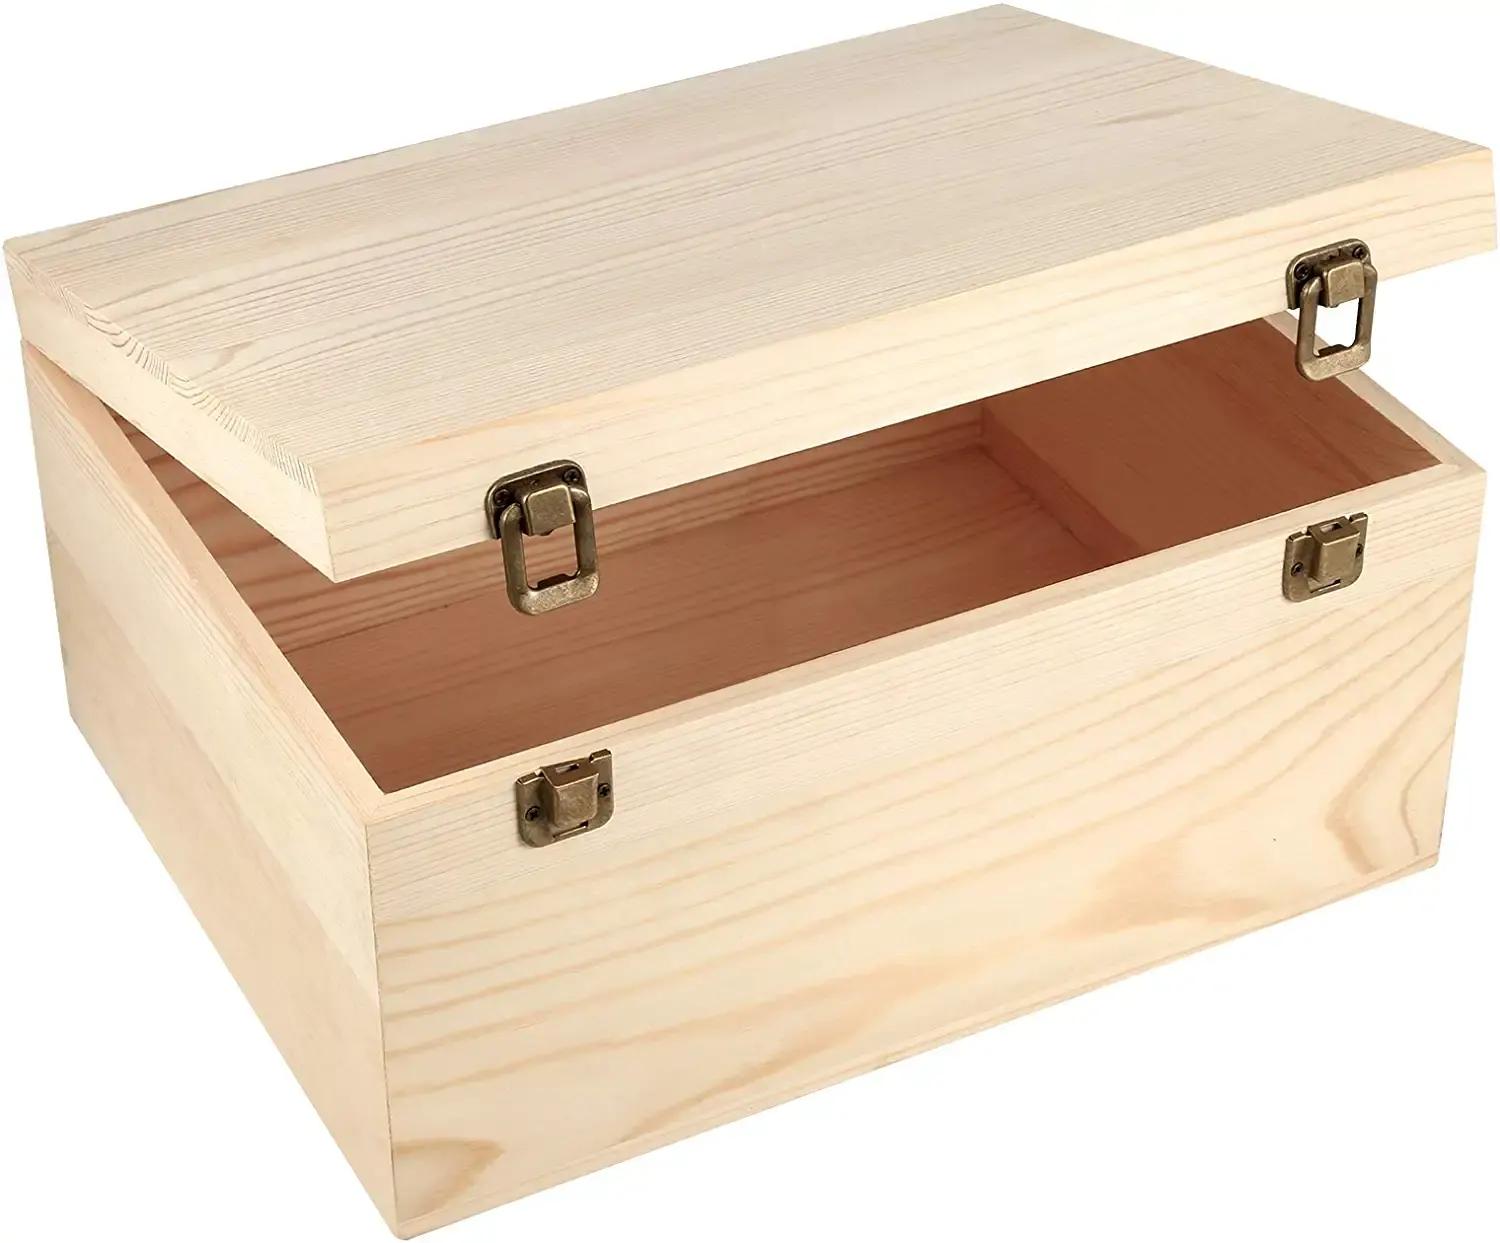 Customized wooden bamboo box and artistic wooden handicraft wooden box